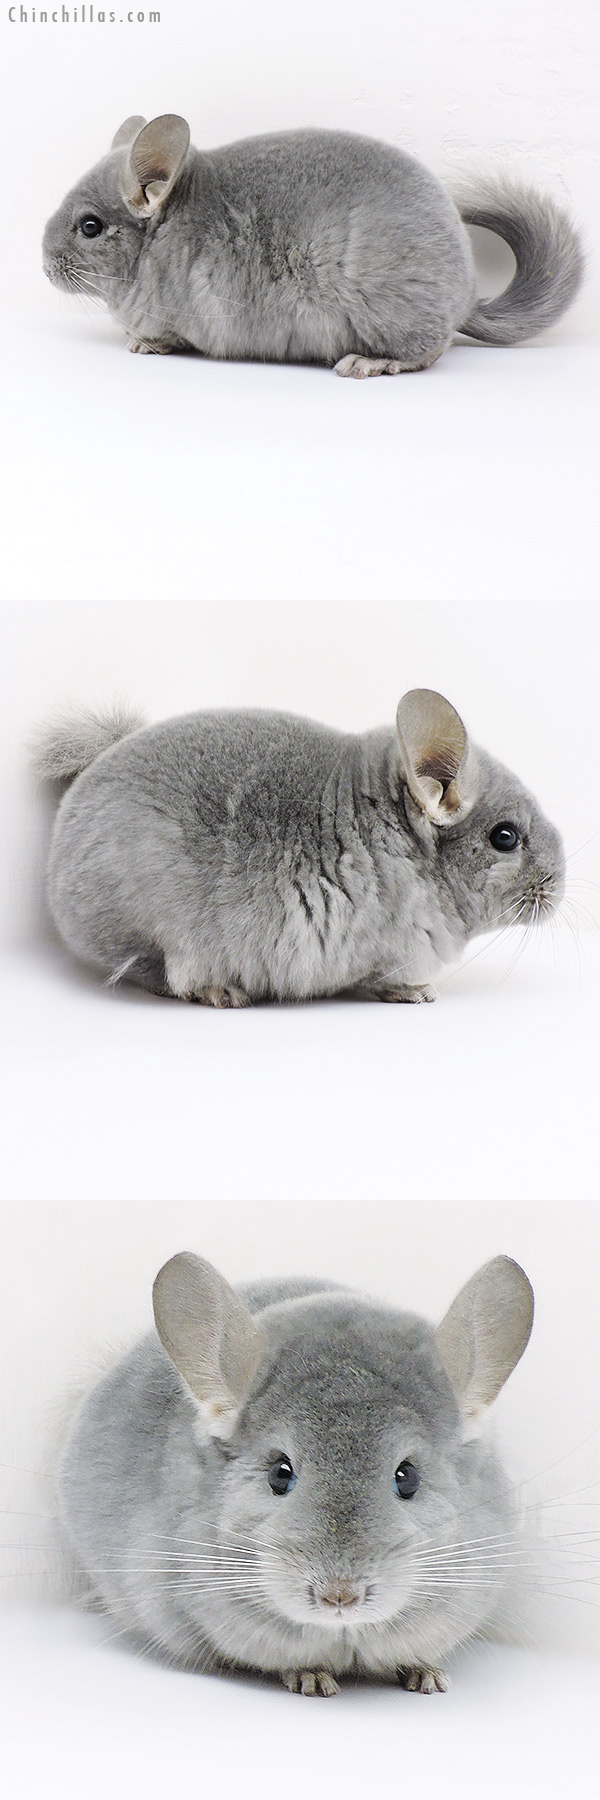 Chinchilla or related item offered for sale or export on Chinchillas.com - 19161 Premium Production Quality Wrap Around Blue Diamond Female Chinchilla